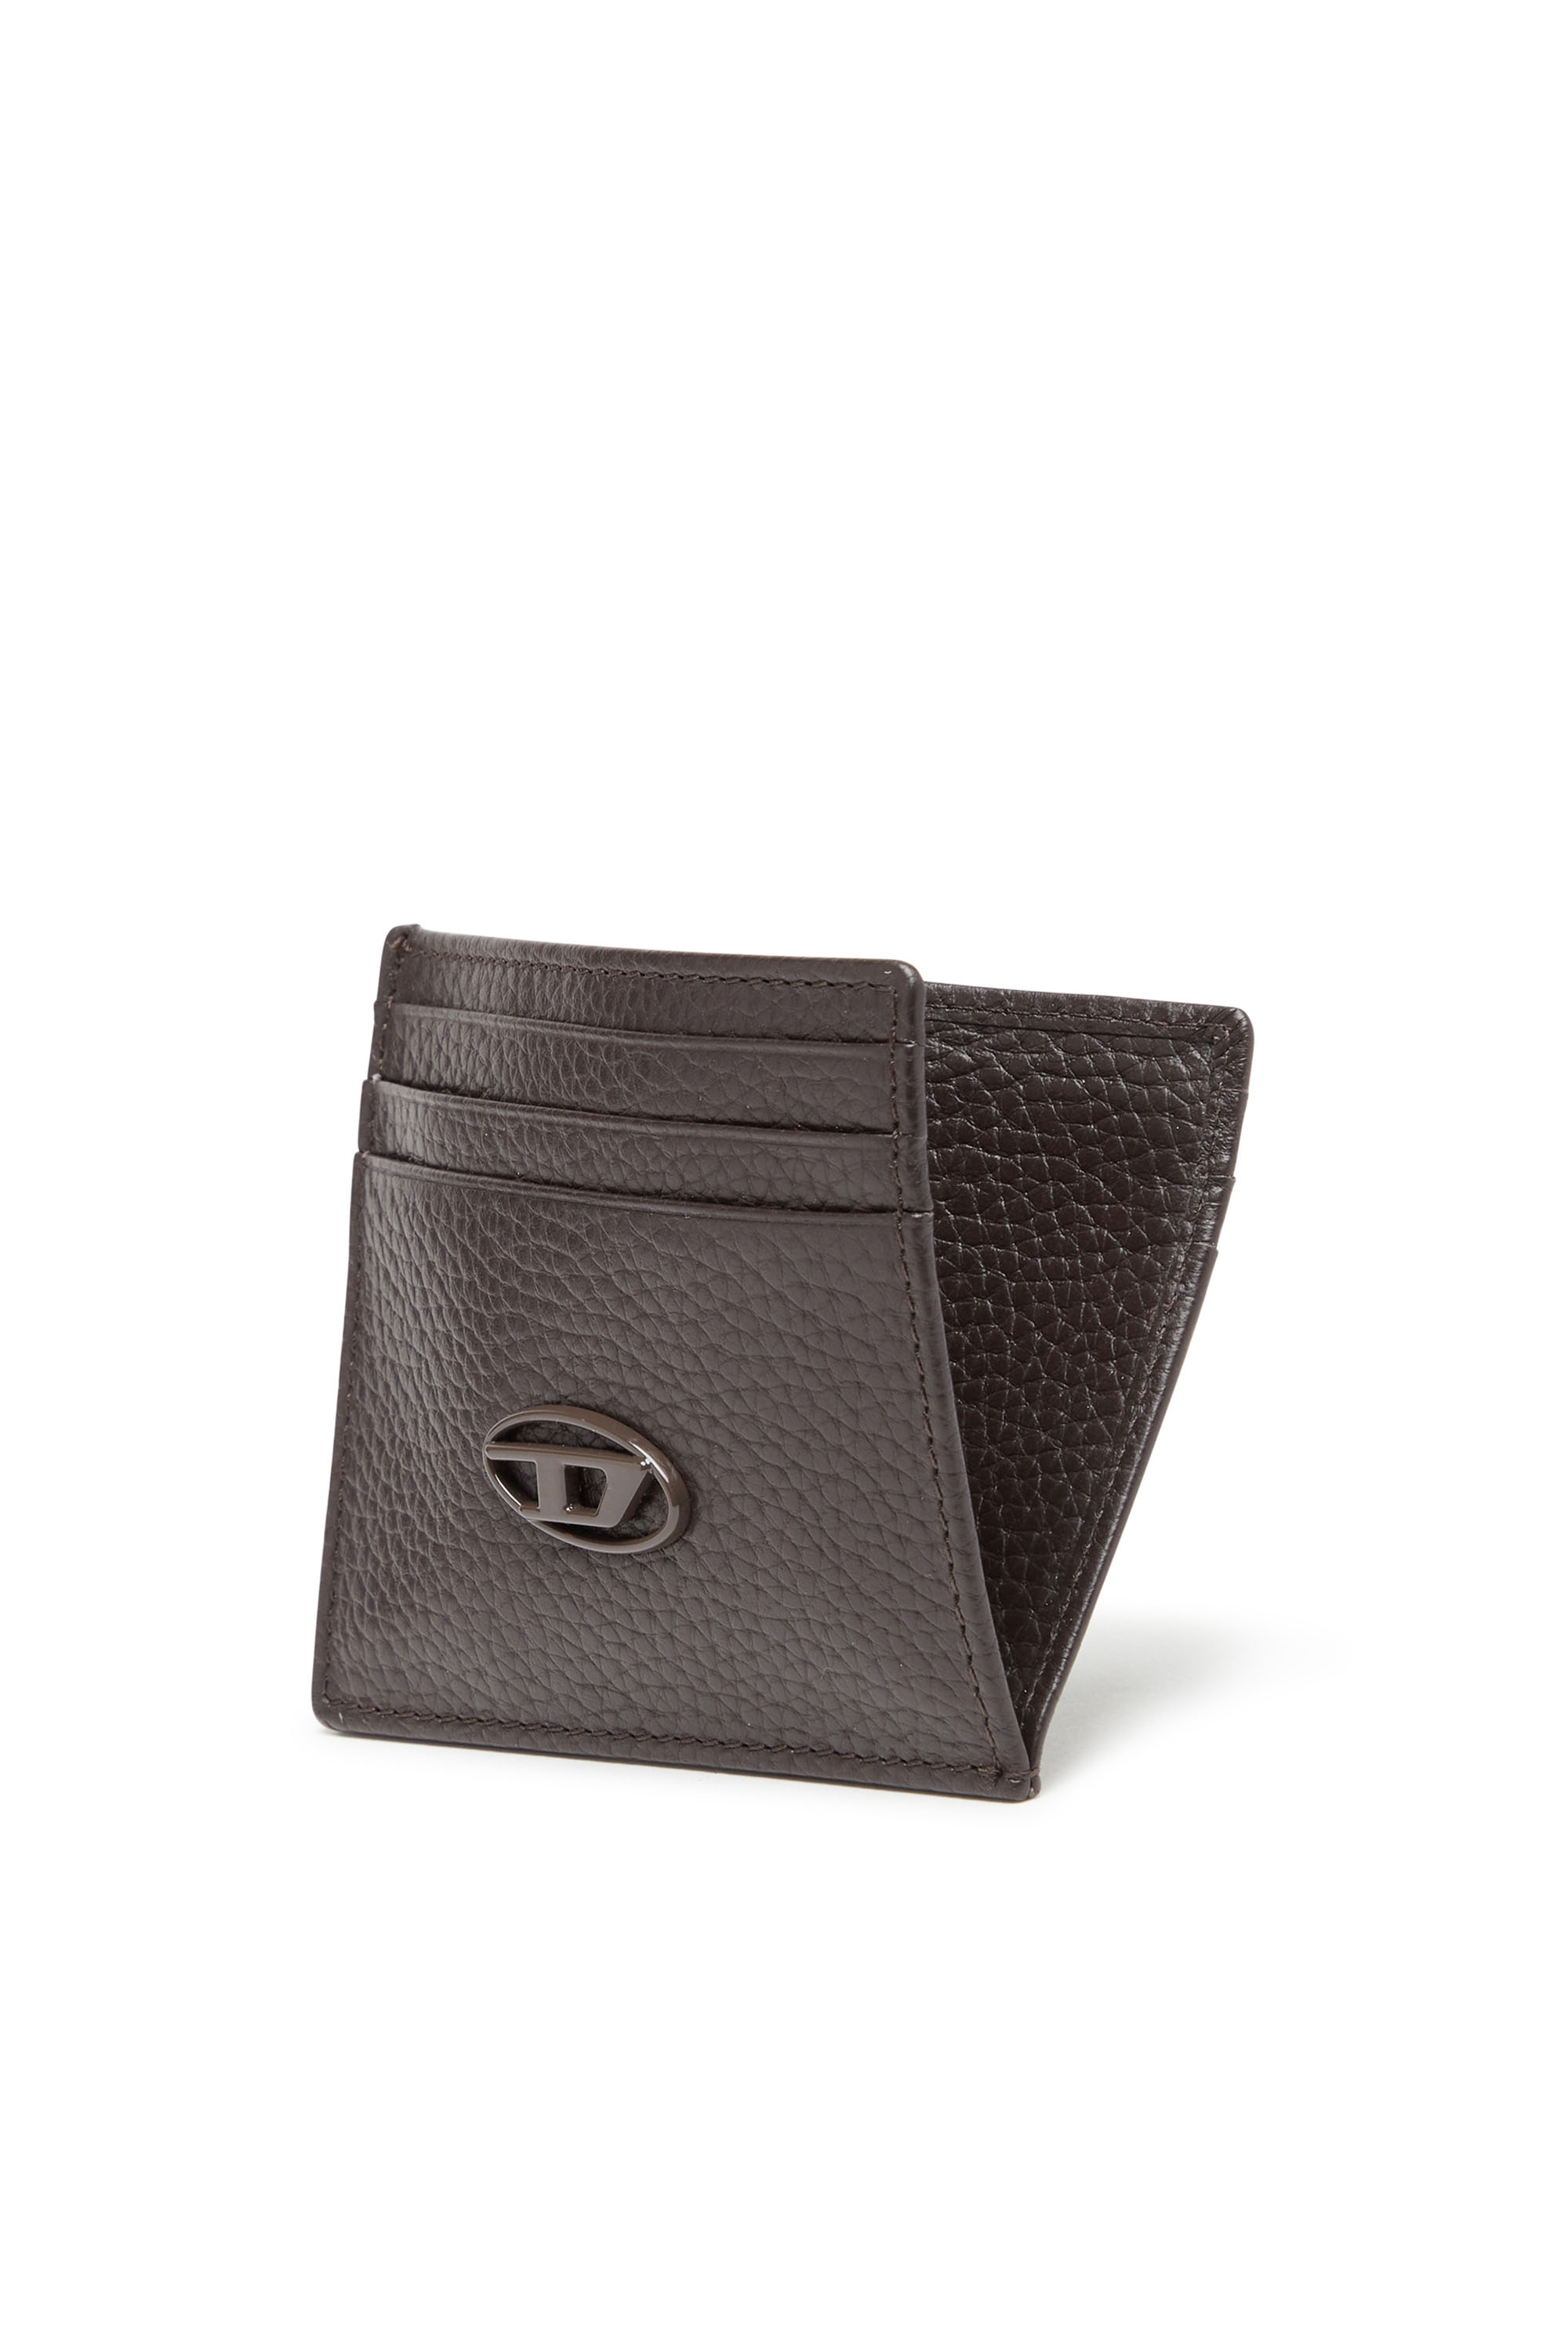 Diesel - CARD CASE, Man Card case in grained leather in Brown - Image 3